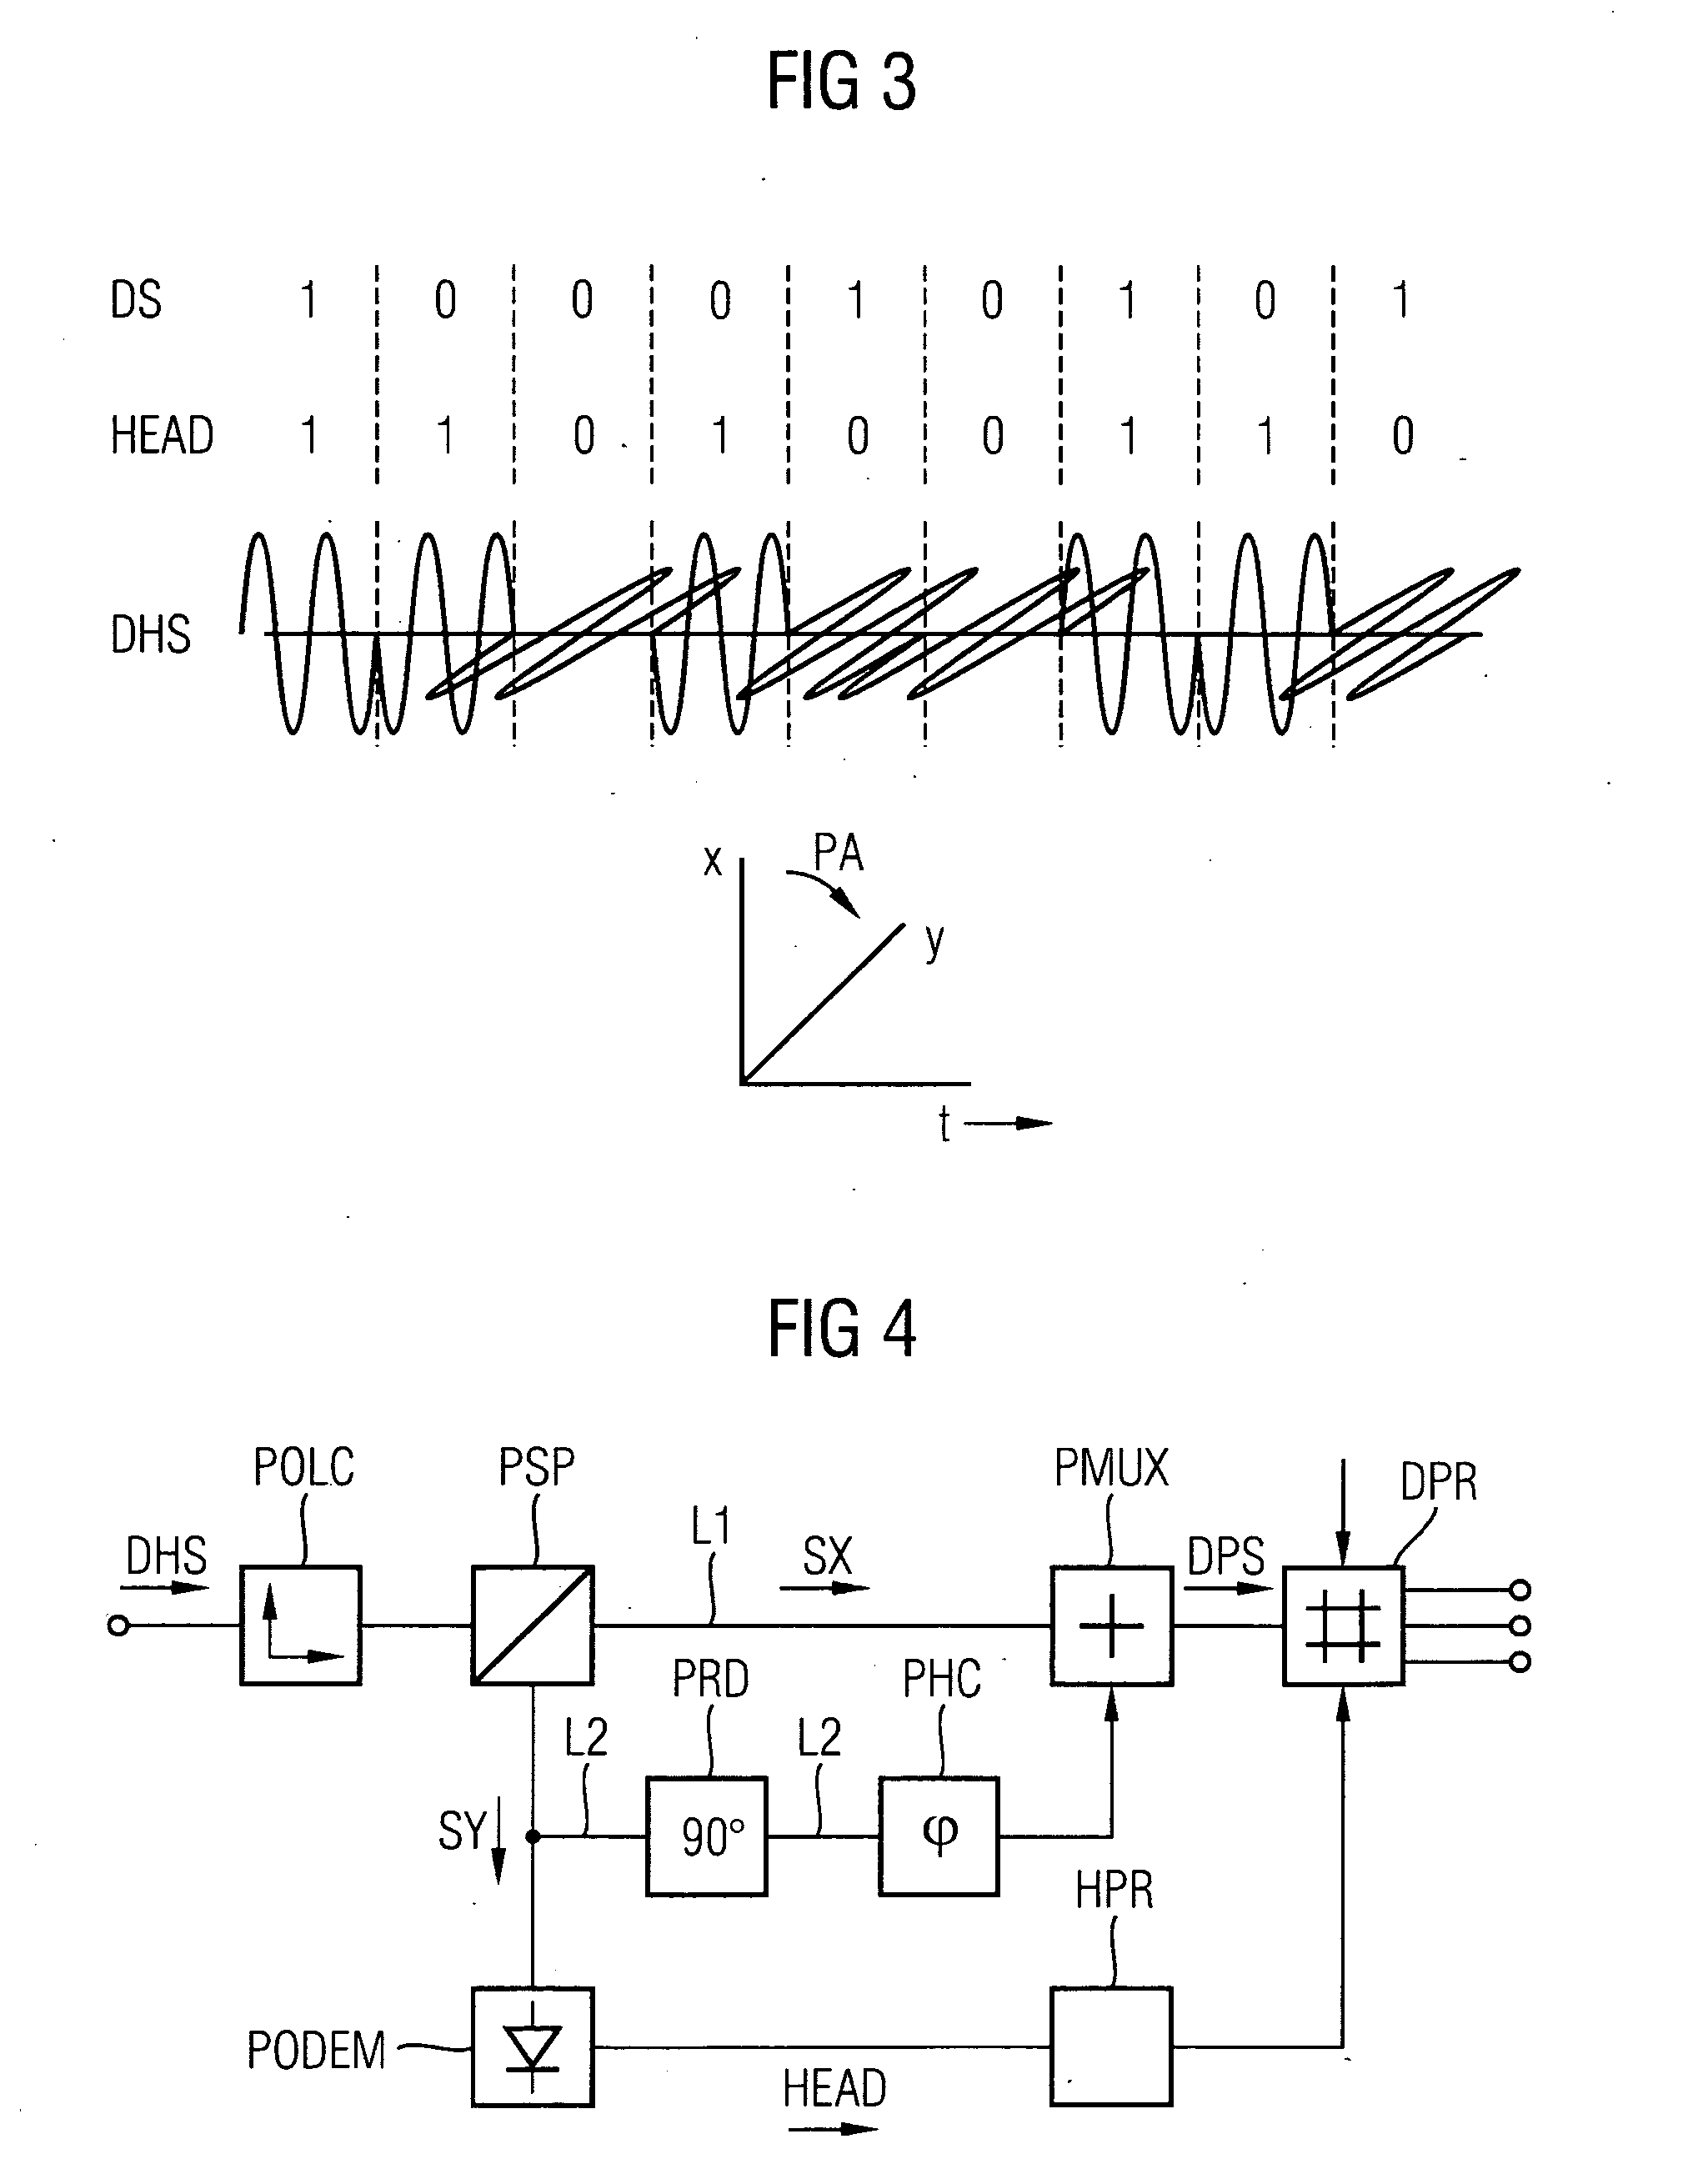 Method for transmitting data signals and additional signals in an optical network